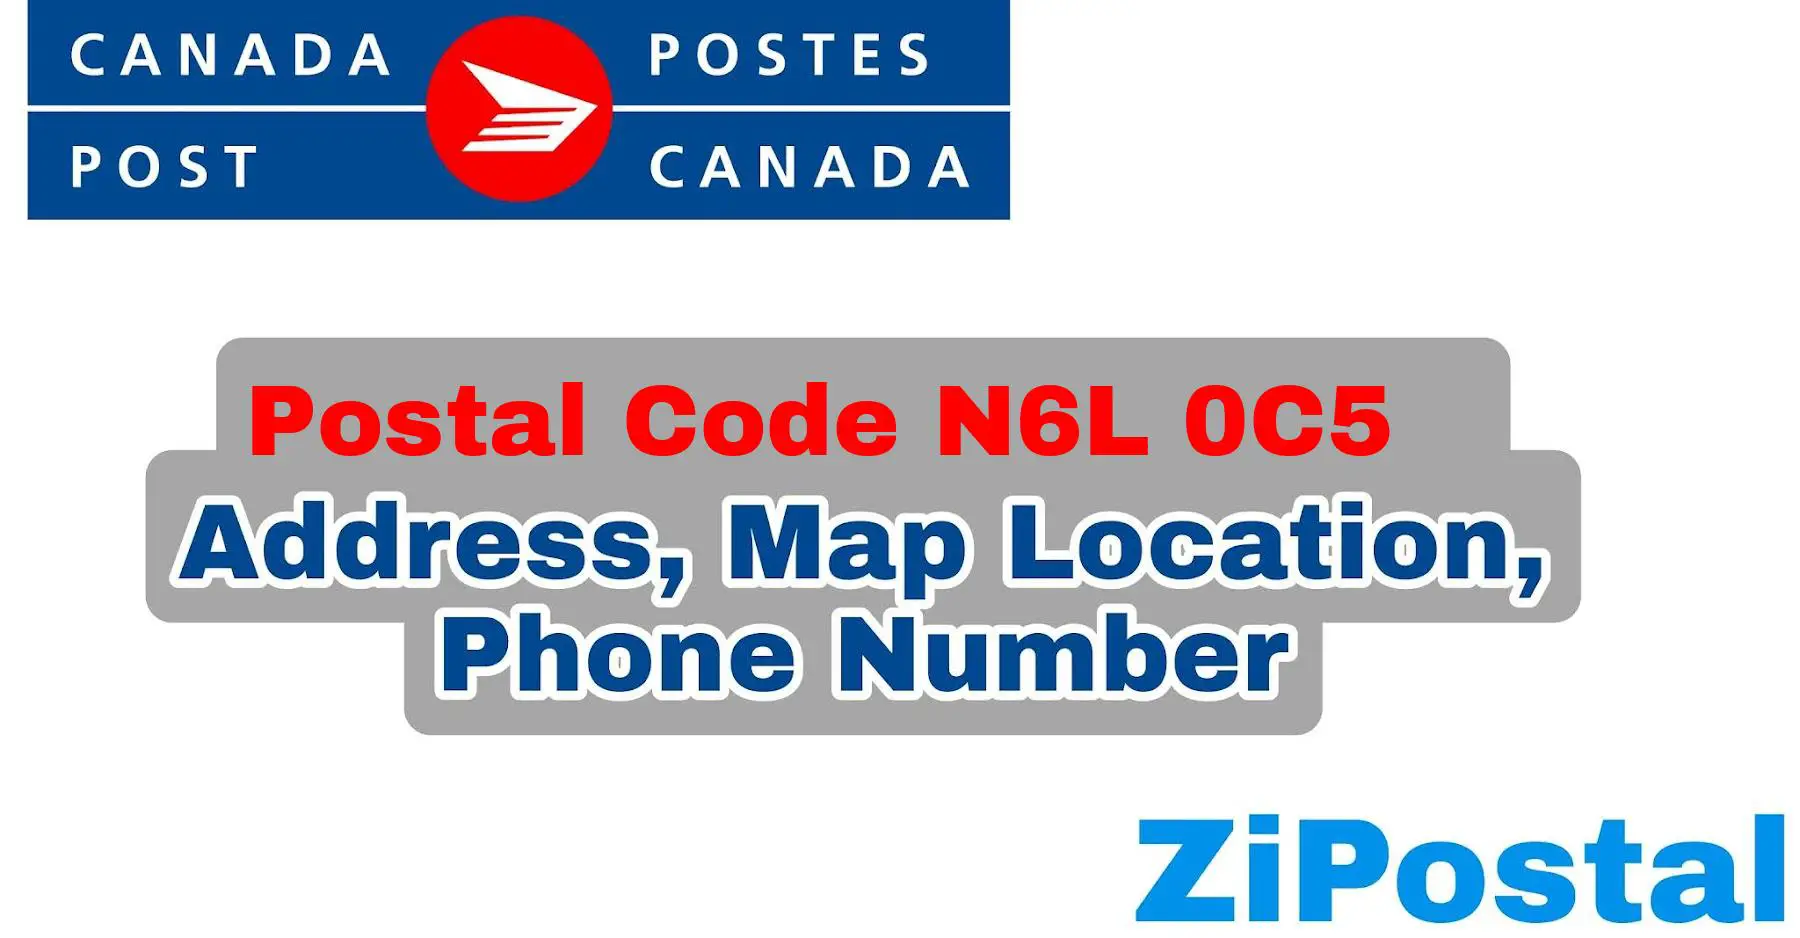 Postal Code N6L 0C5 Address Map Location and Phone Number